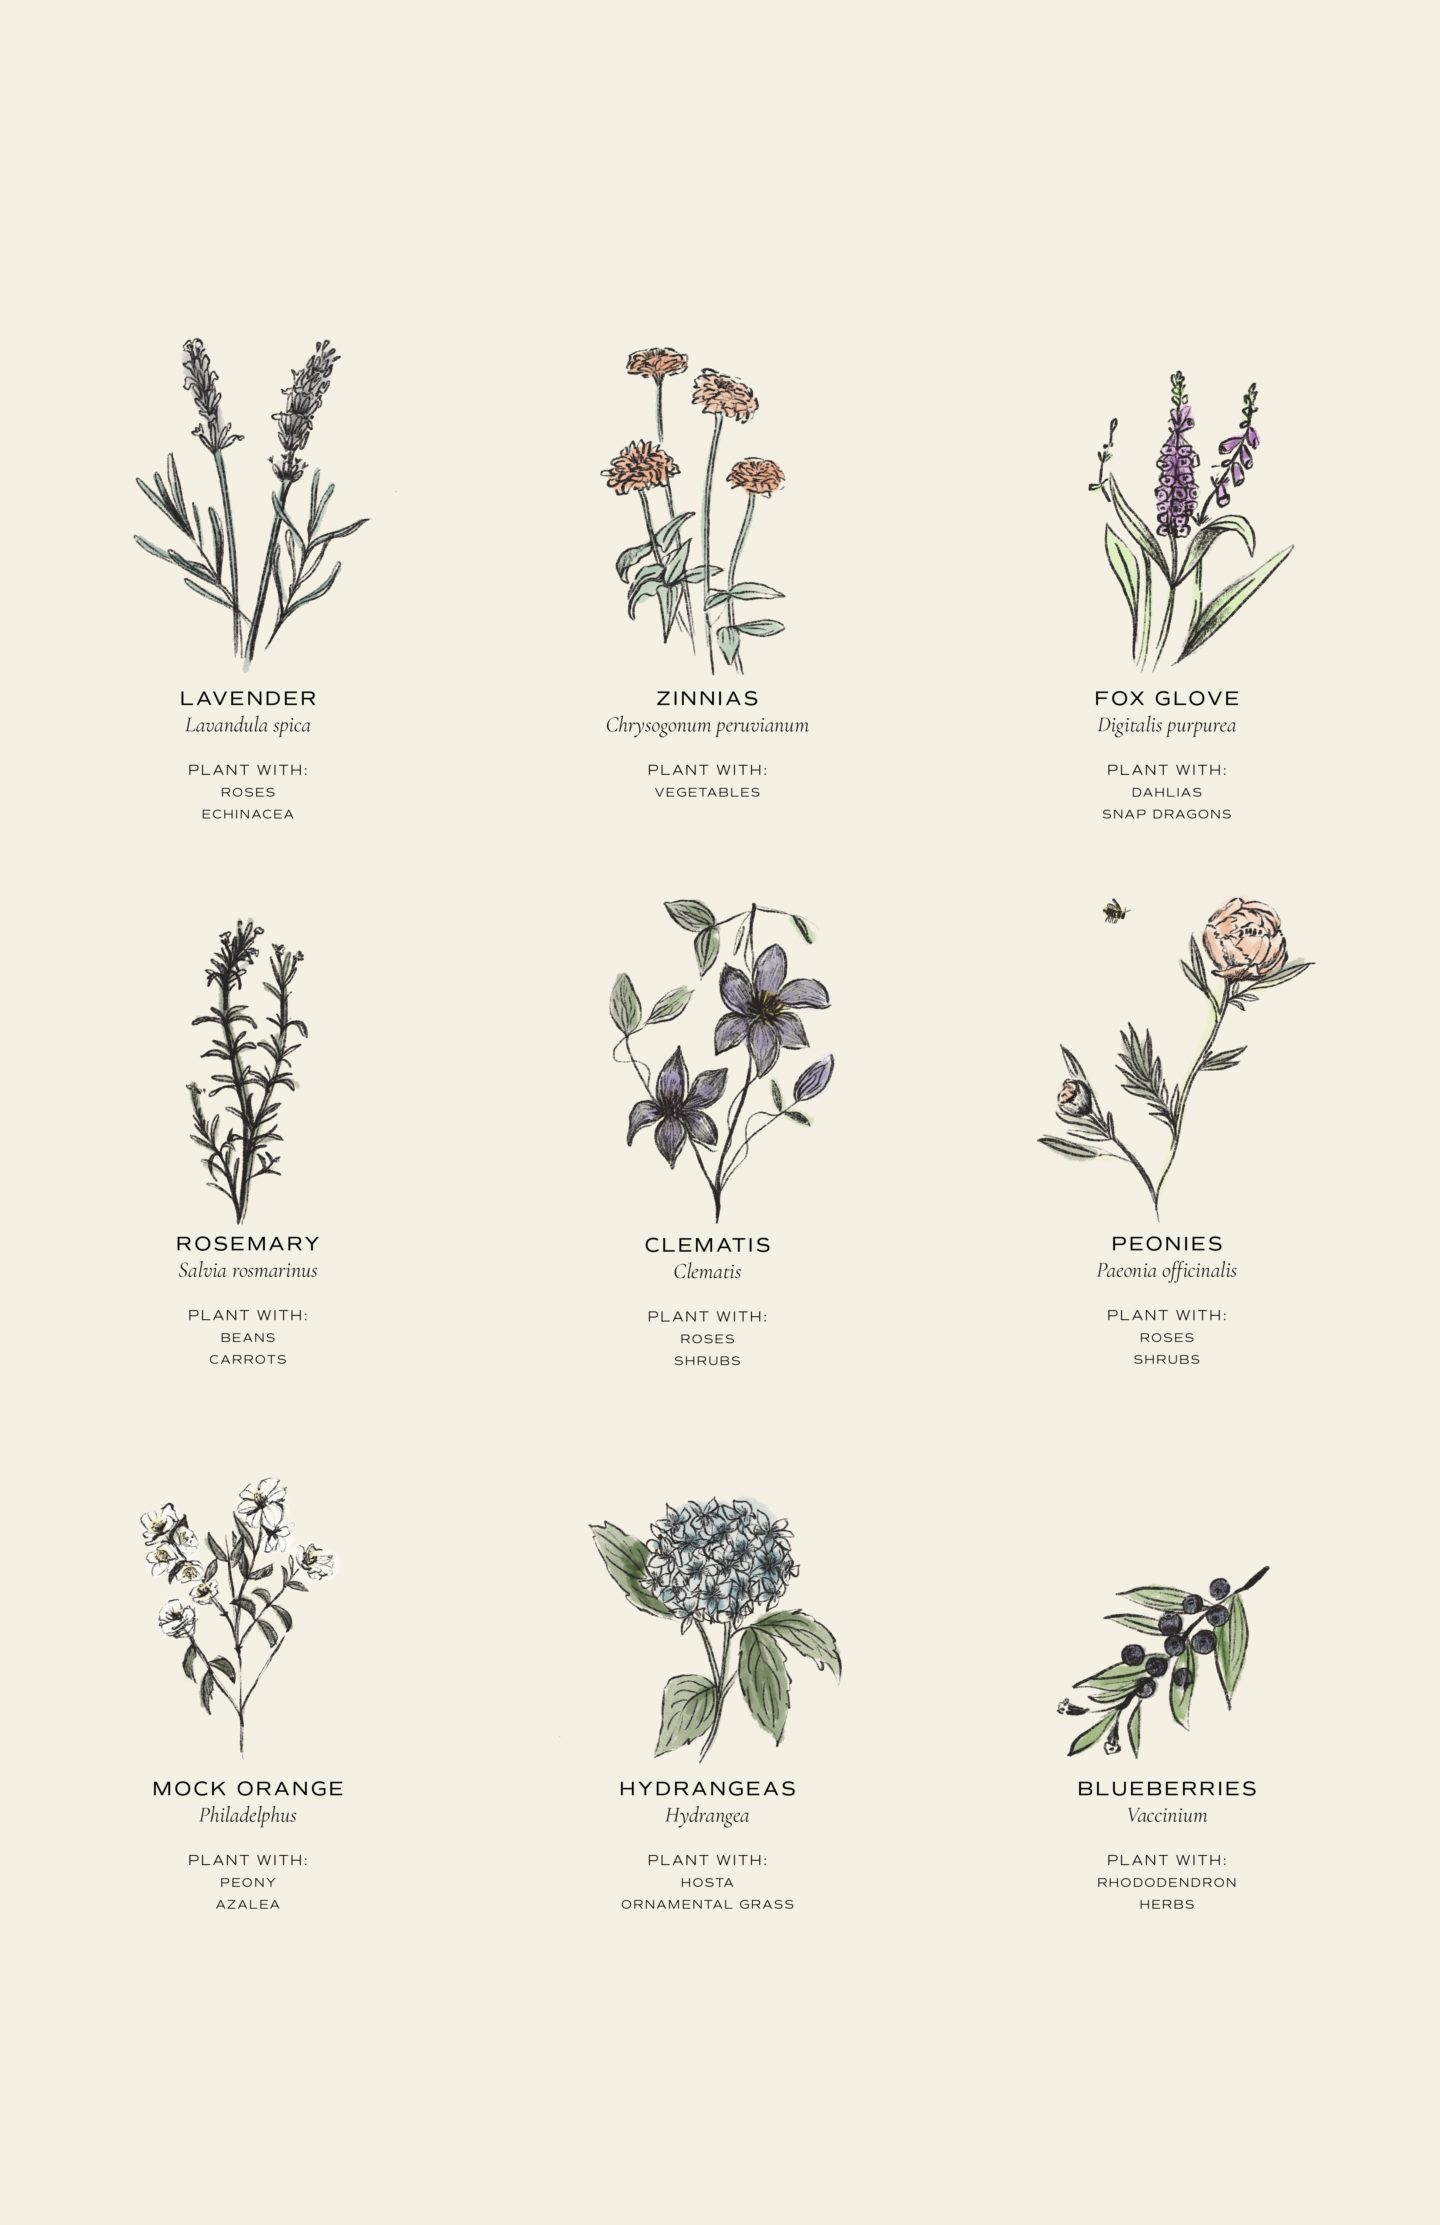 Spring Planting Guide: What to Plant in May